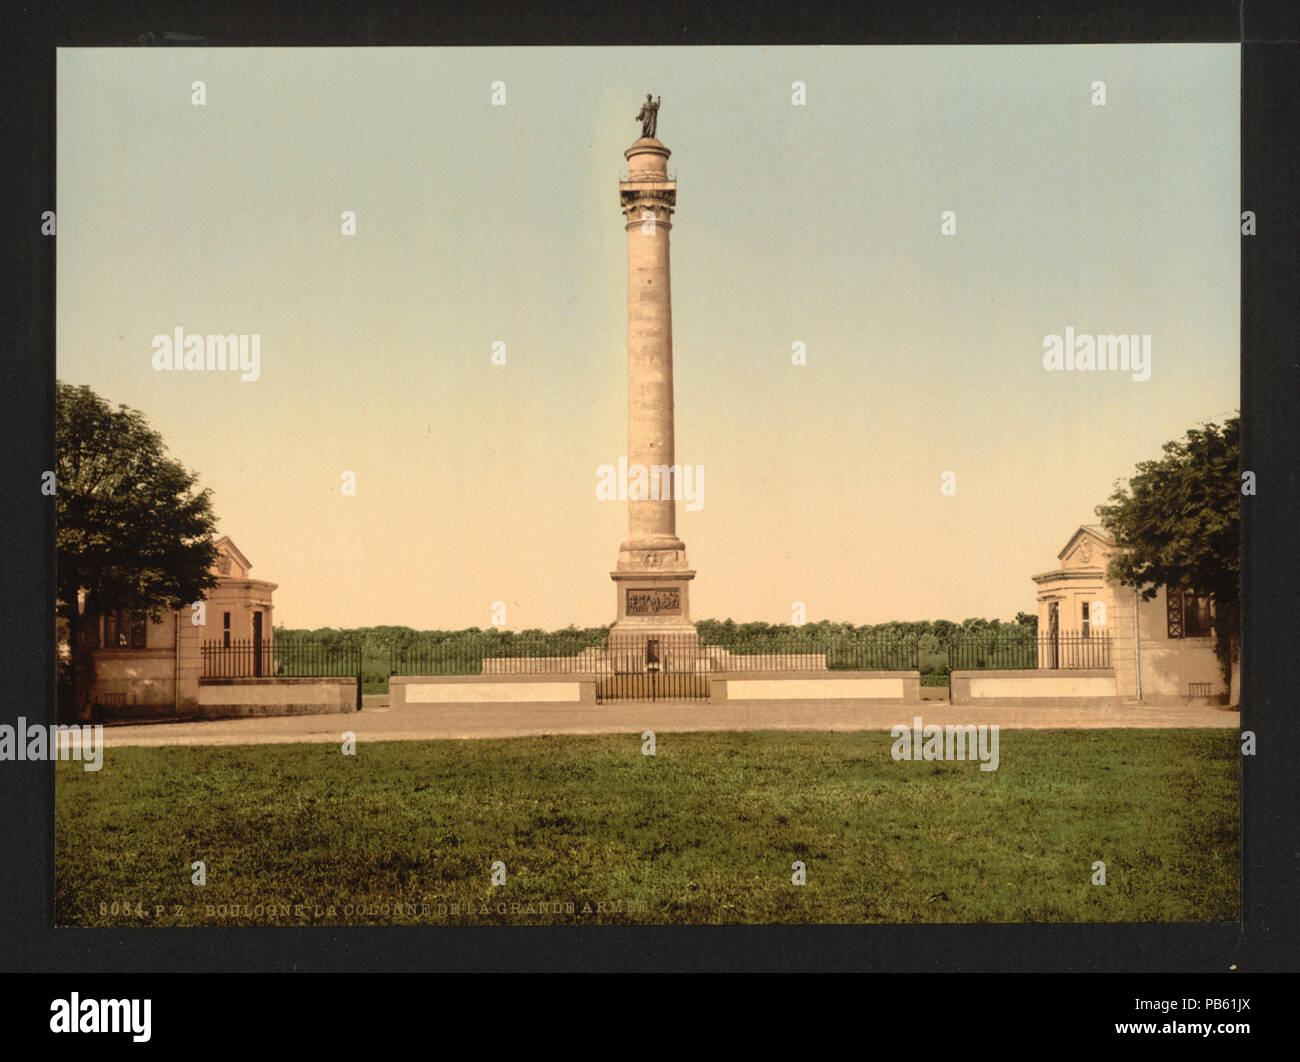 1624 The column of the great army, Boulogne, France-LCCN2001697593 Stock Photo